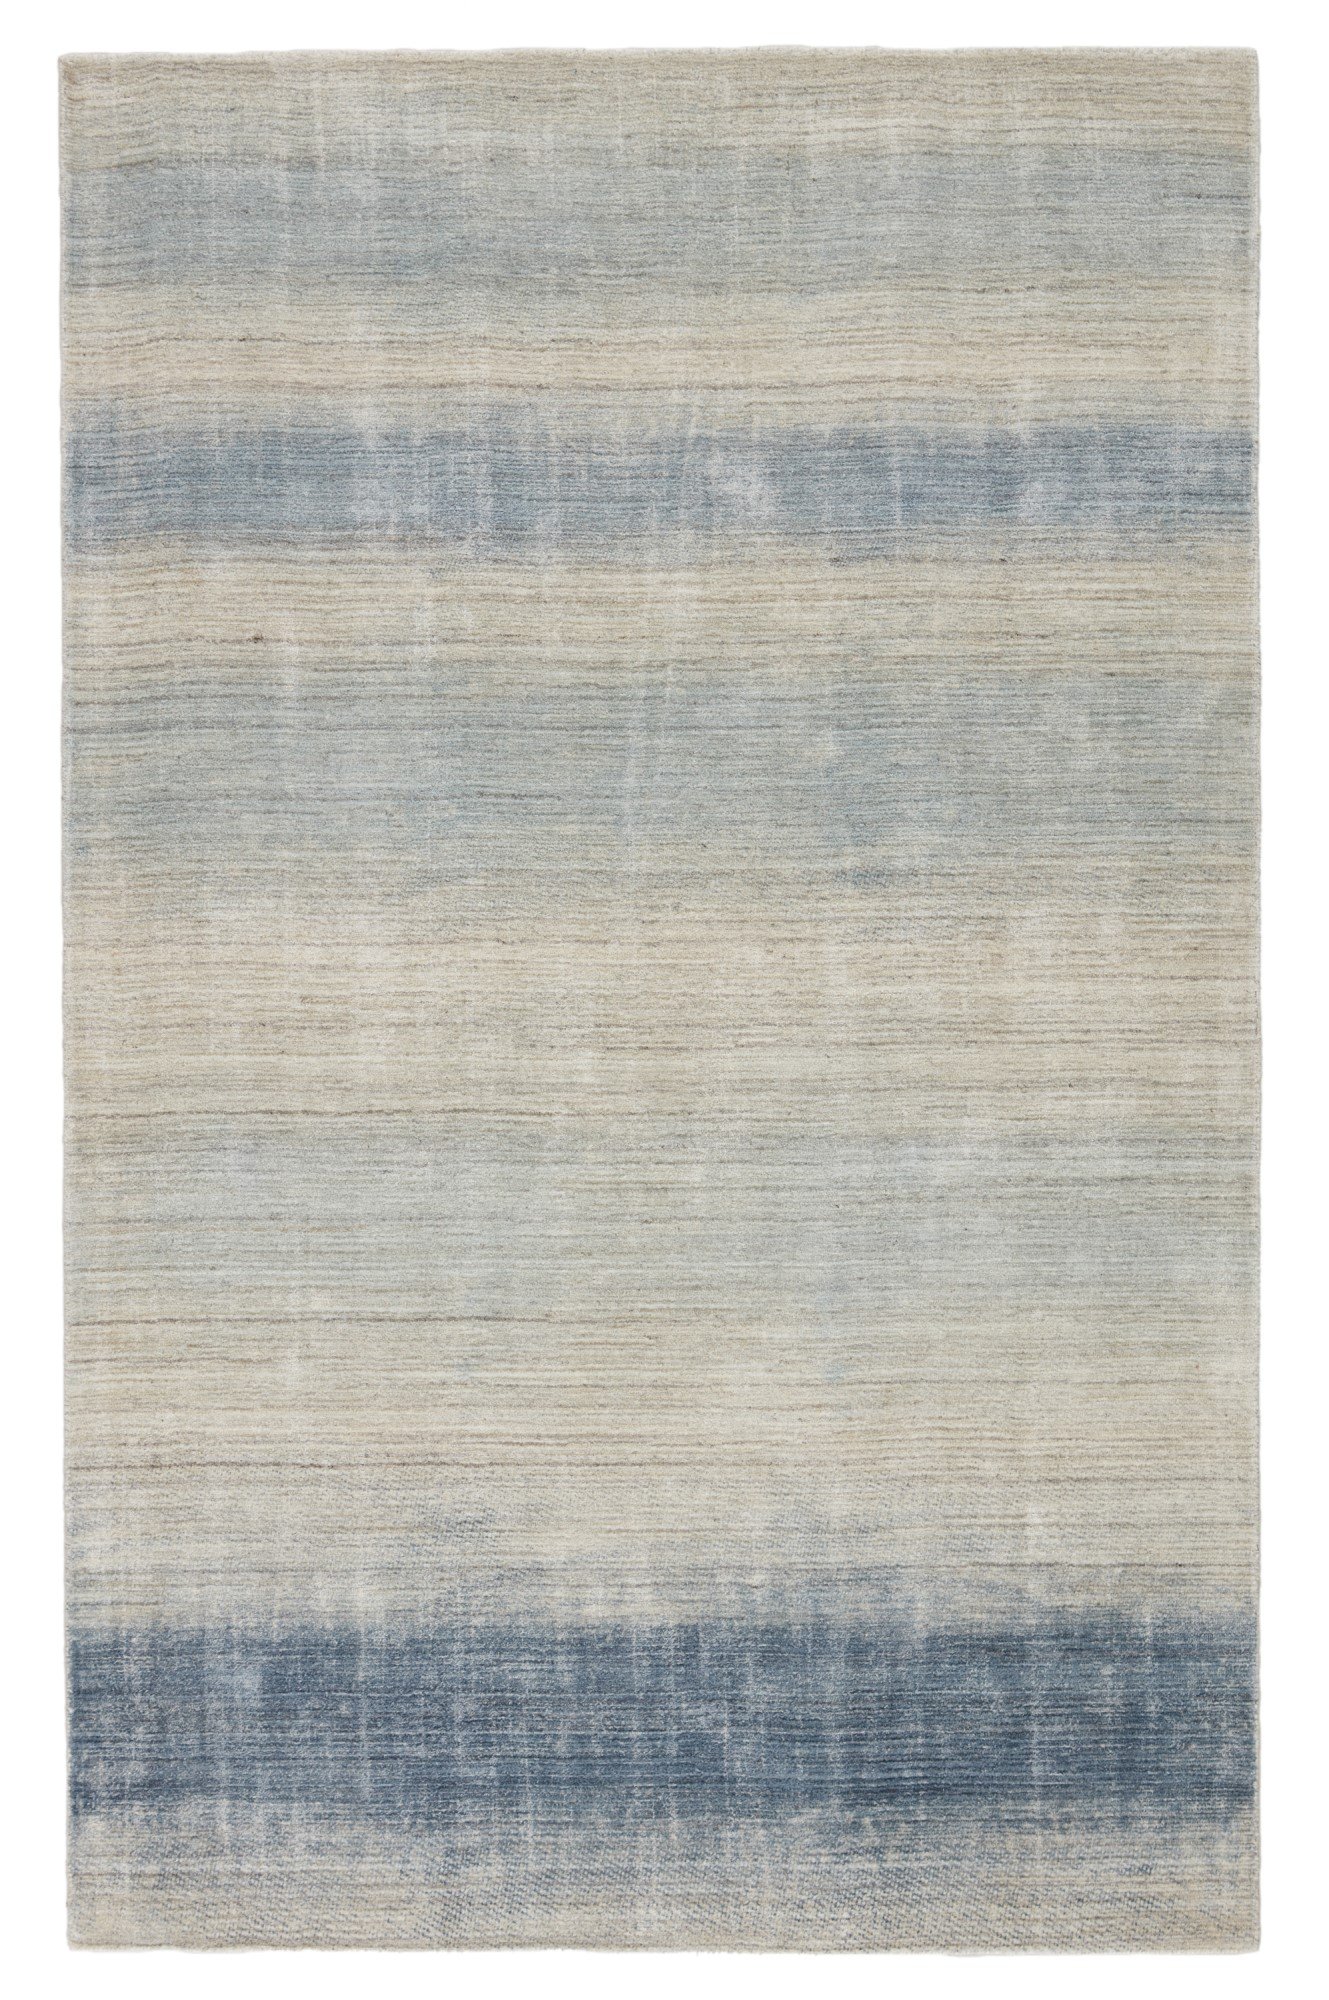 Ombre Blue Area Rugs Direct, Blue Ombre Area Rug